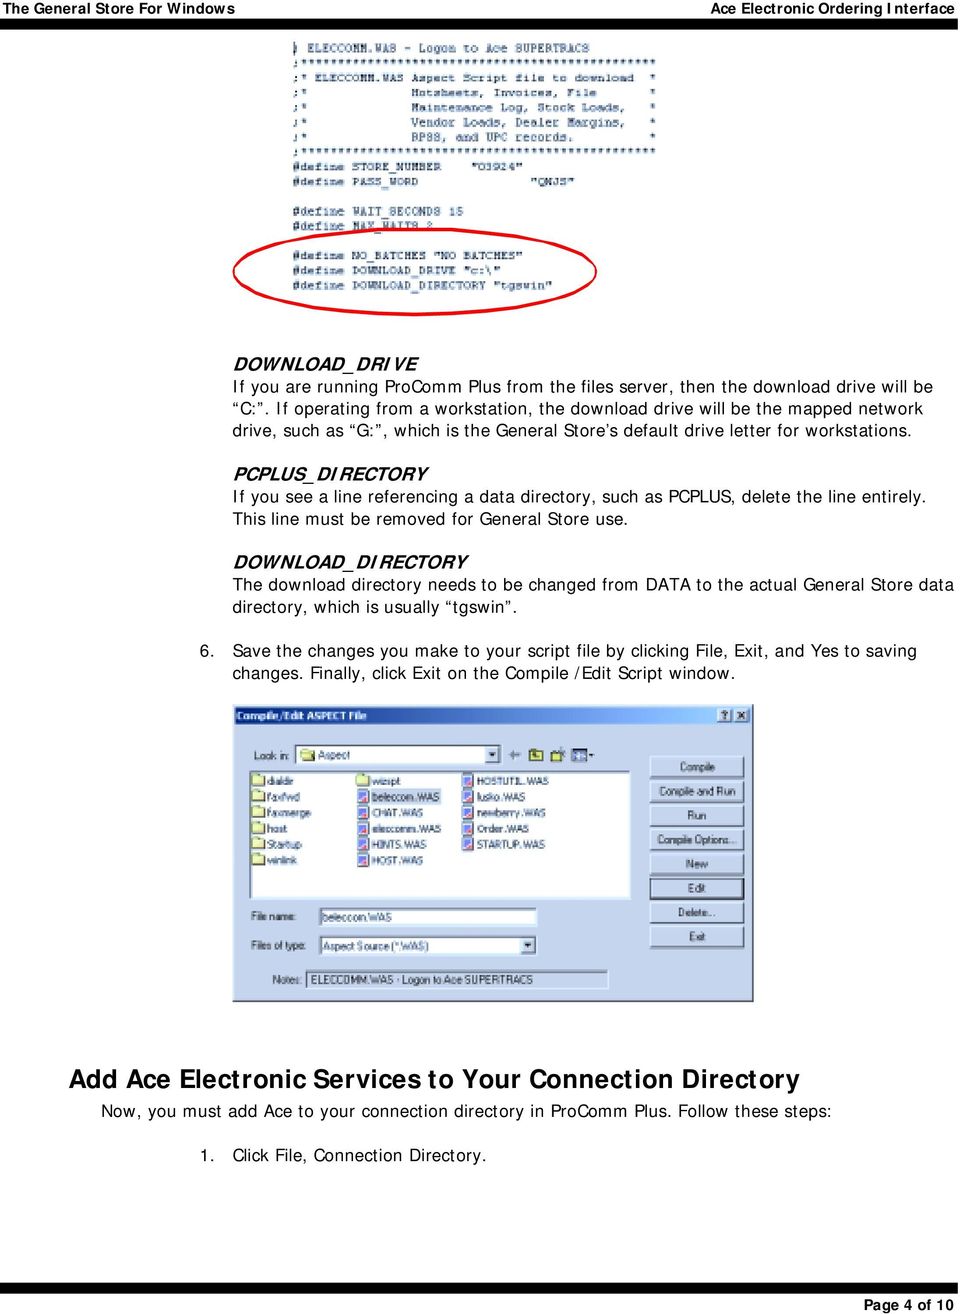 PCPLUS_DIRECTORY If you see a line referencing a data directory, such as PCPLUS, delete the line entirely. This line must be removed for General Store use.